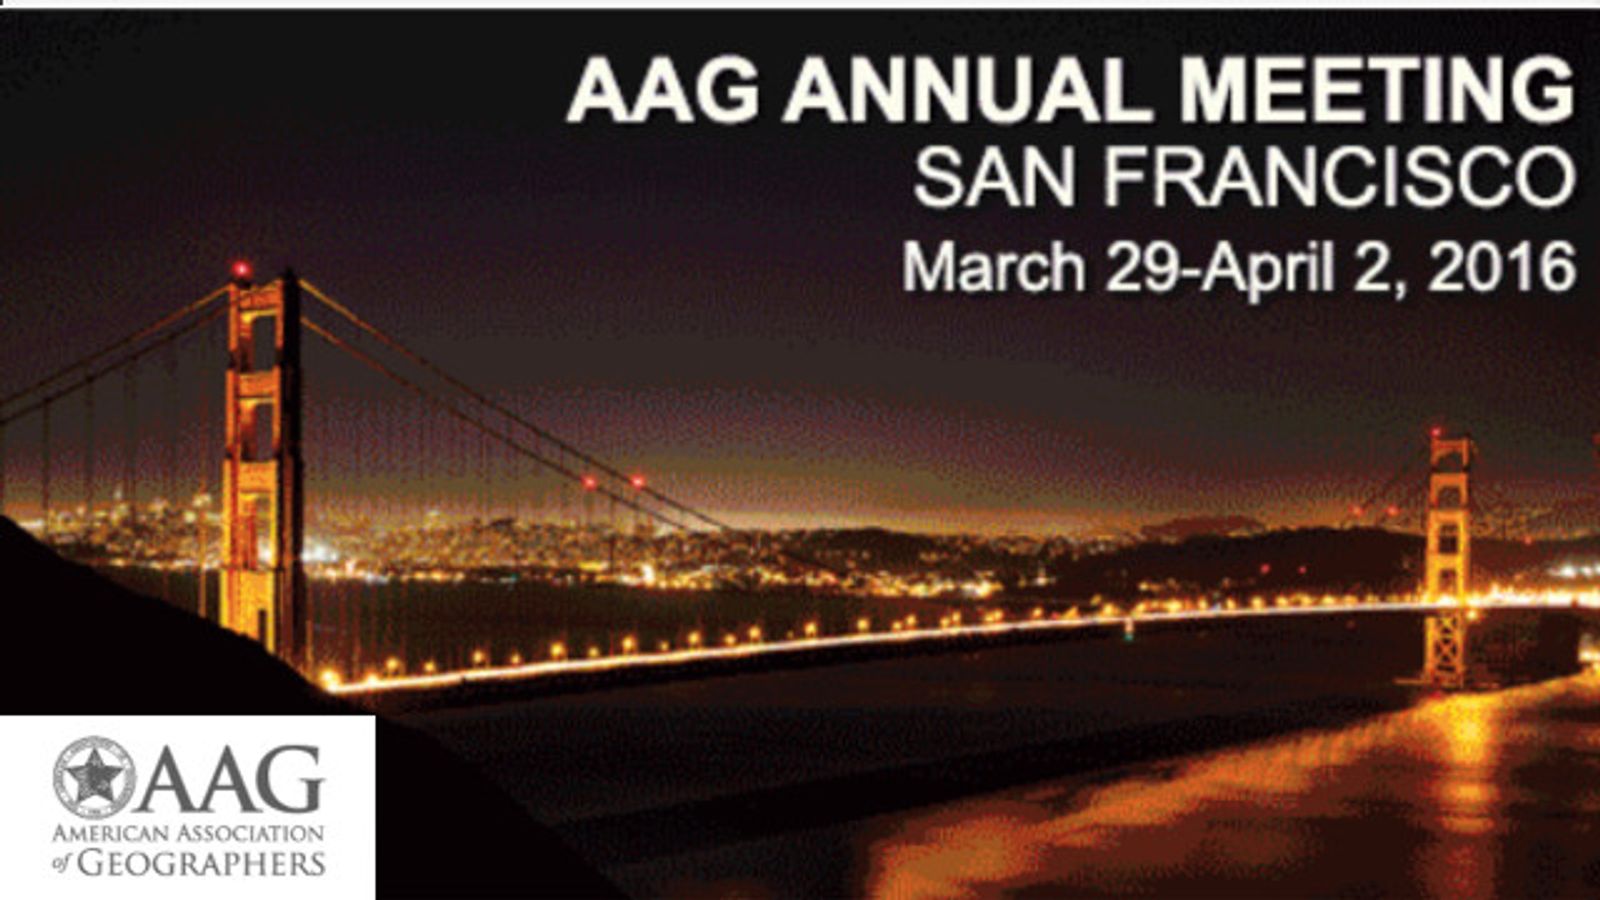 Sex Work to Receive Platform at AAG Annual Conference